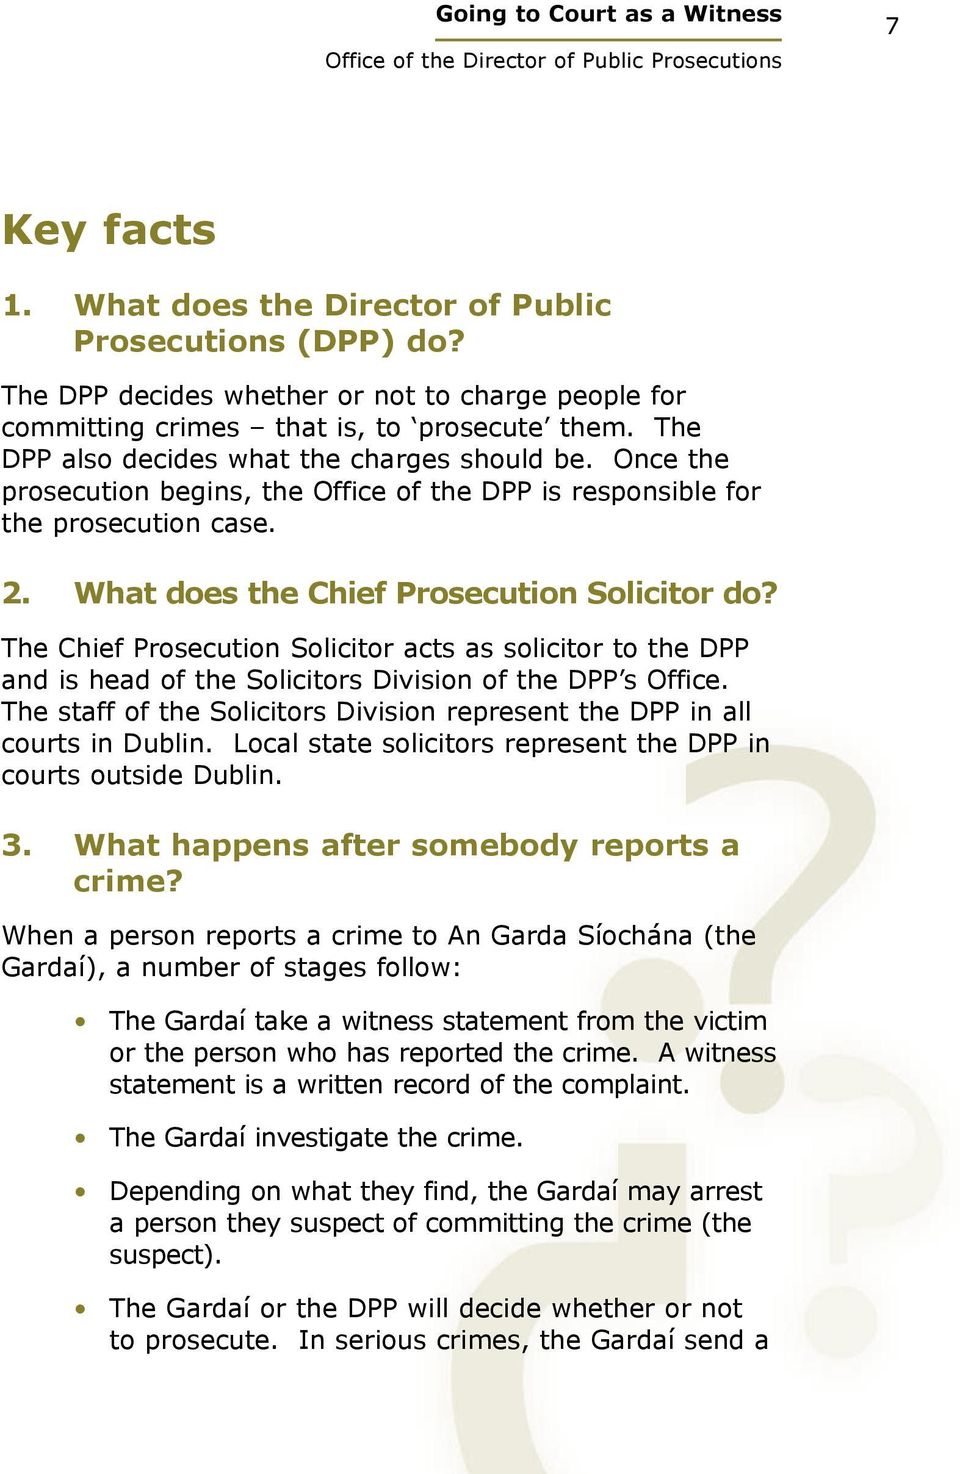 The Chief Prosecution Solicitor acts as solicitor to the DPP and is head of the Solicitors Division of the DPP s Office. The staff of the Solicitors Division represent the DPP in all courts in Dublin.